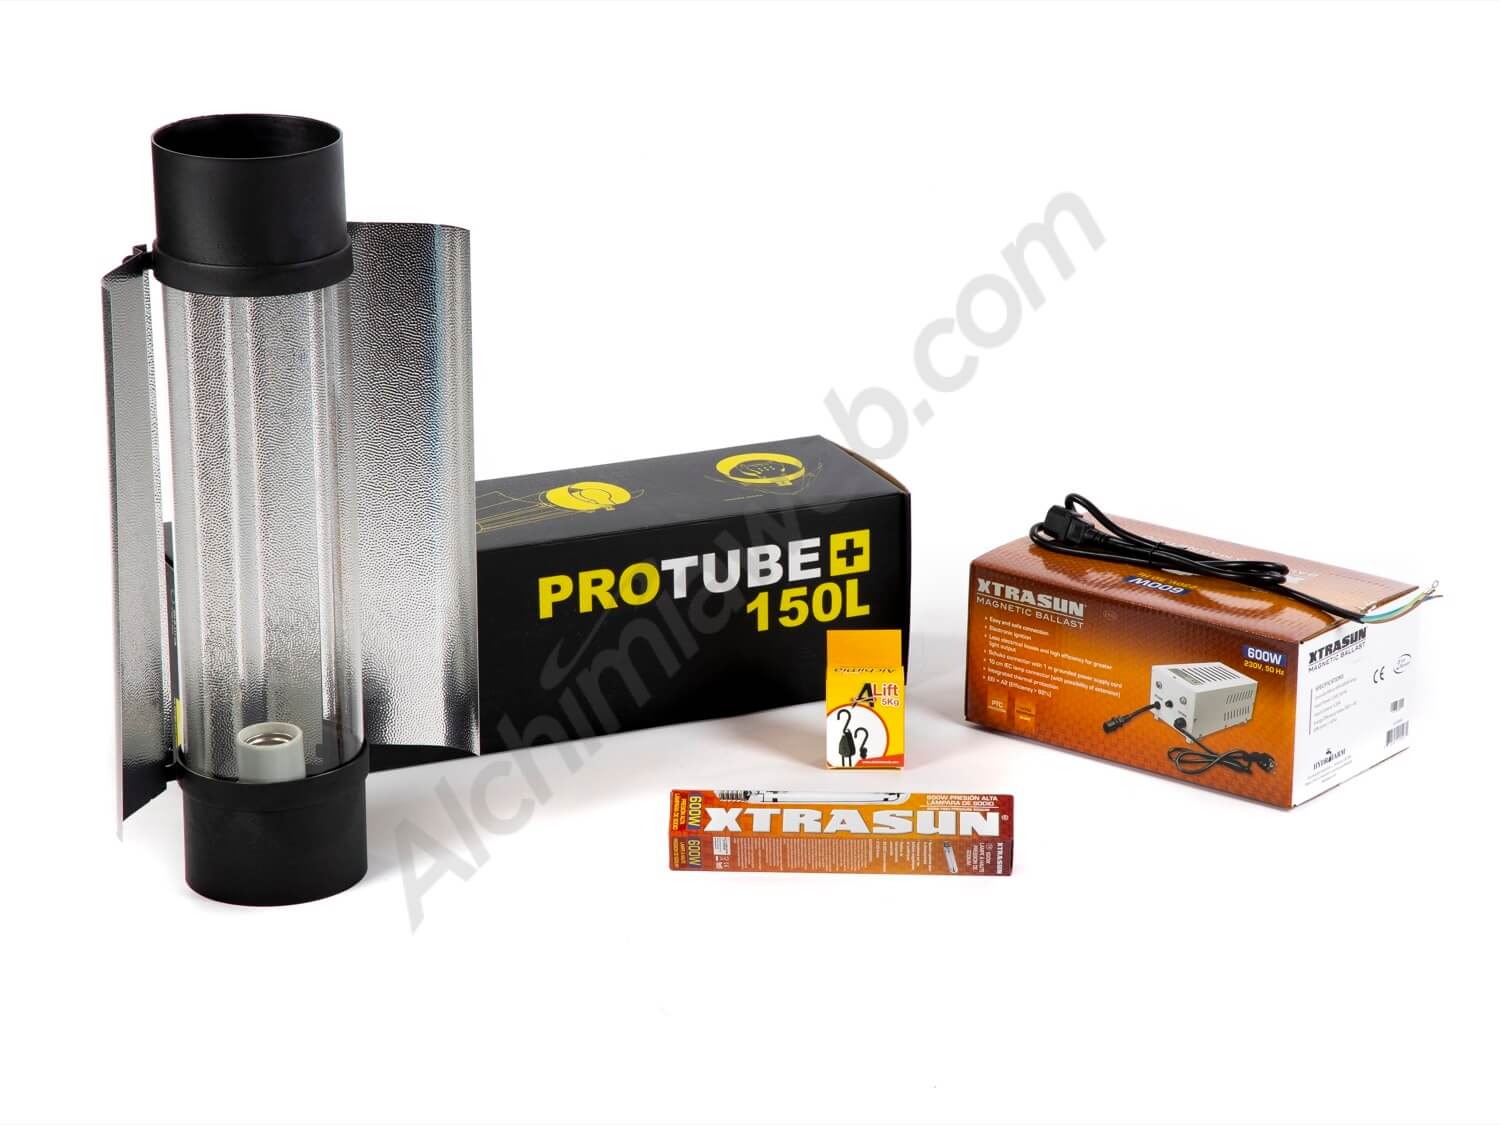 Cooltube Protube 600W 150mm Beleuchtungsset